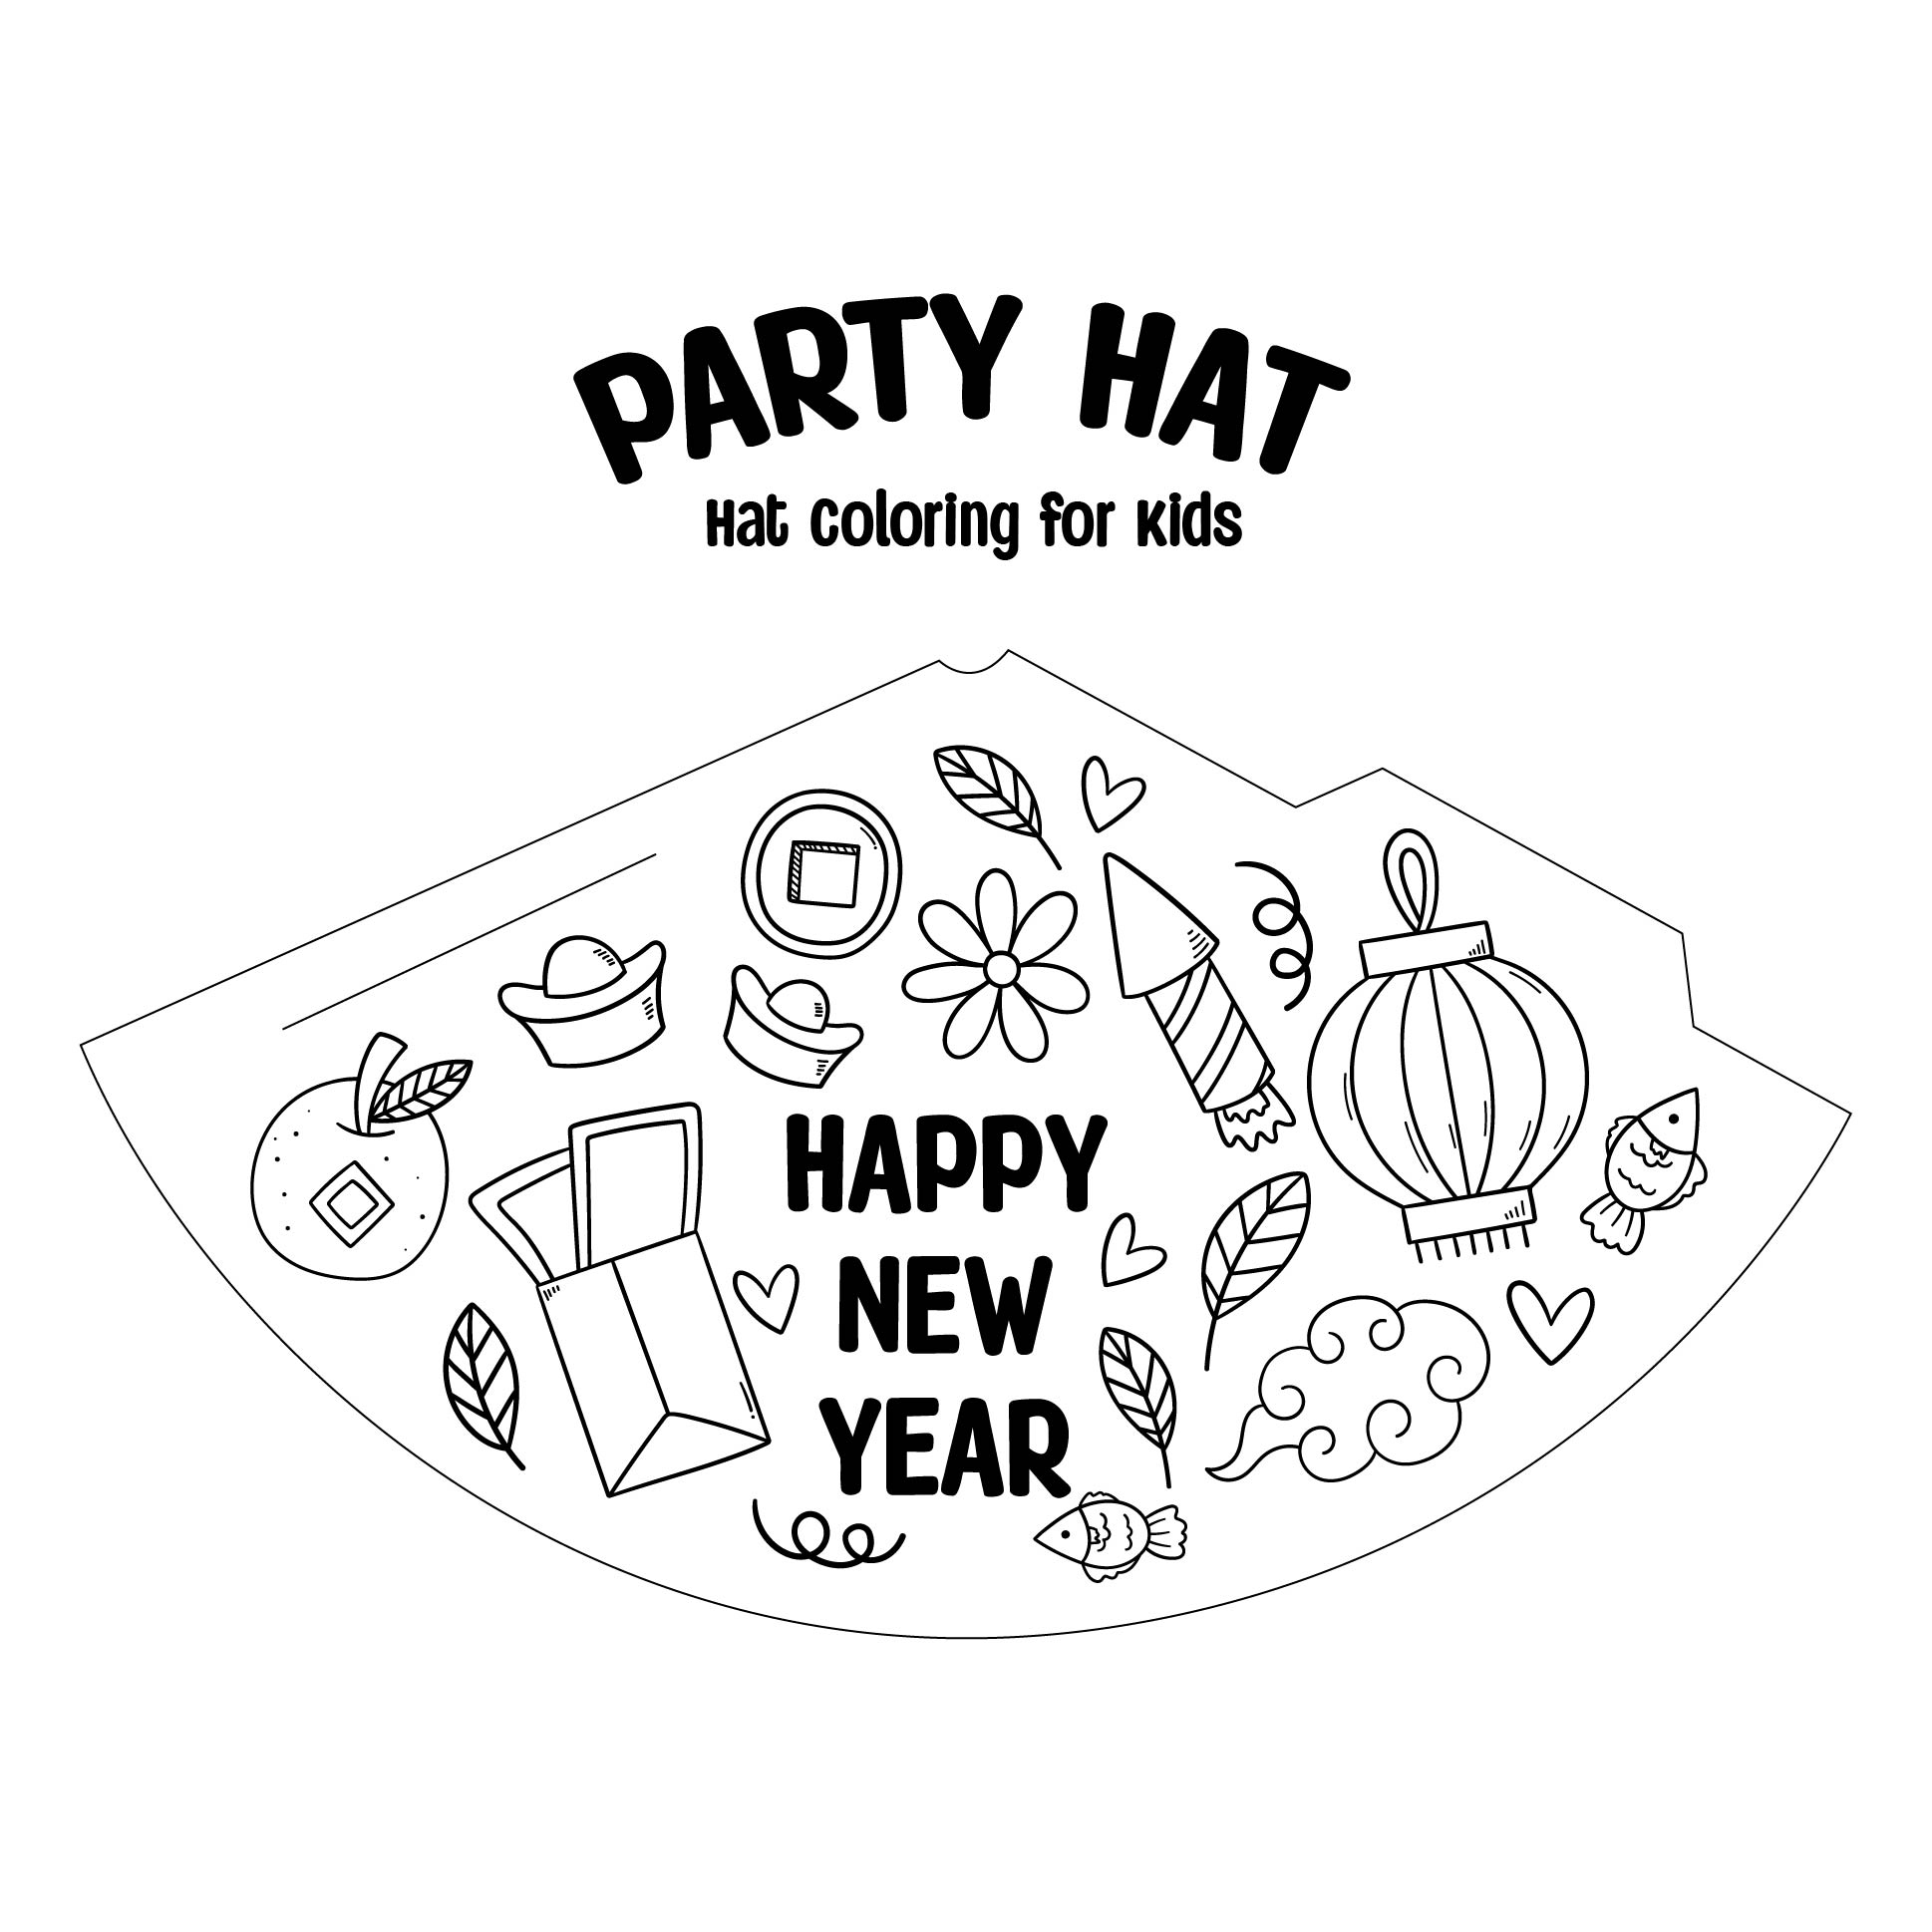 Printable Happy New Year Party Hat Coloring For Kids